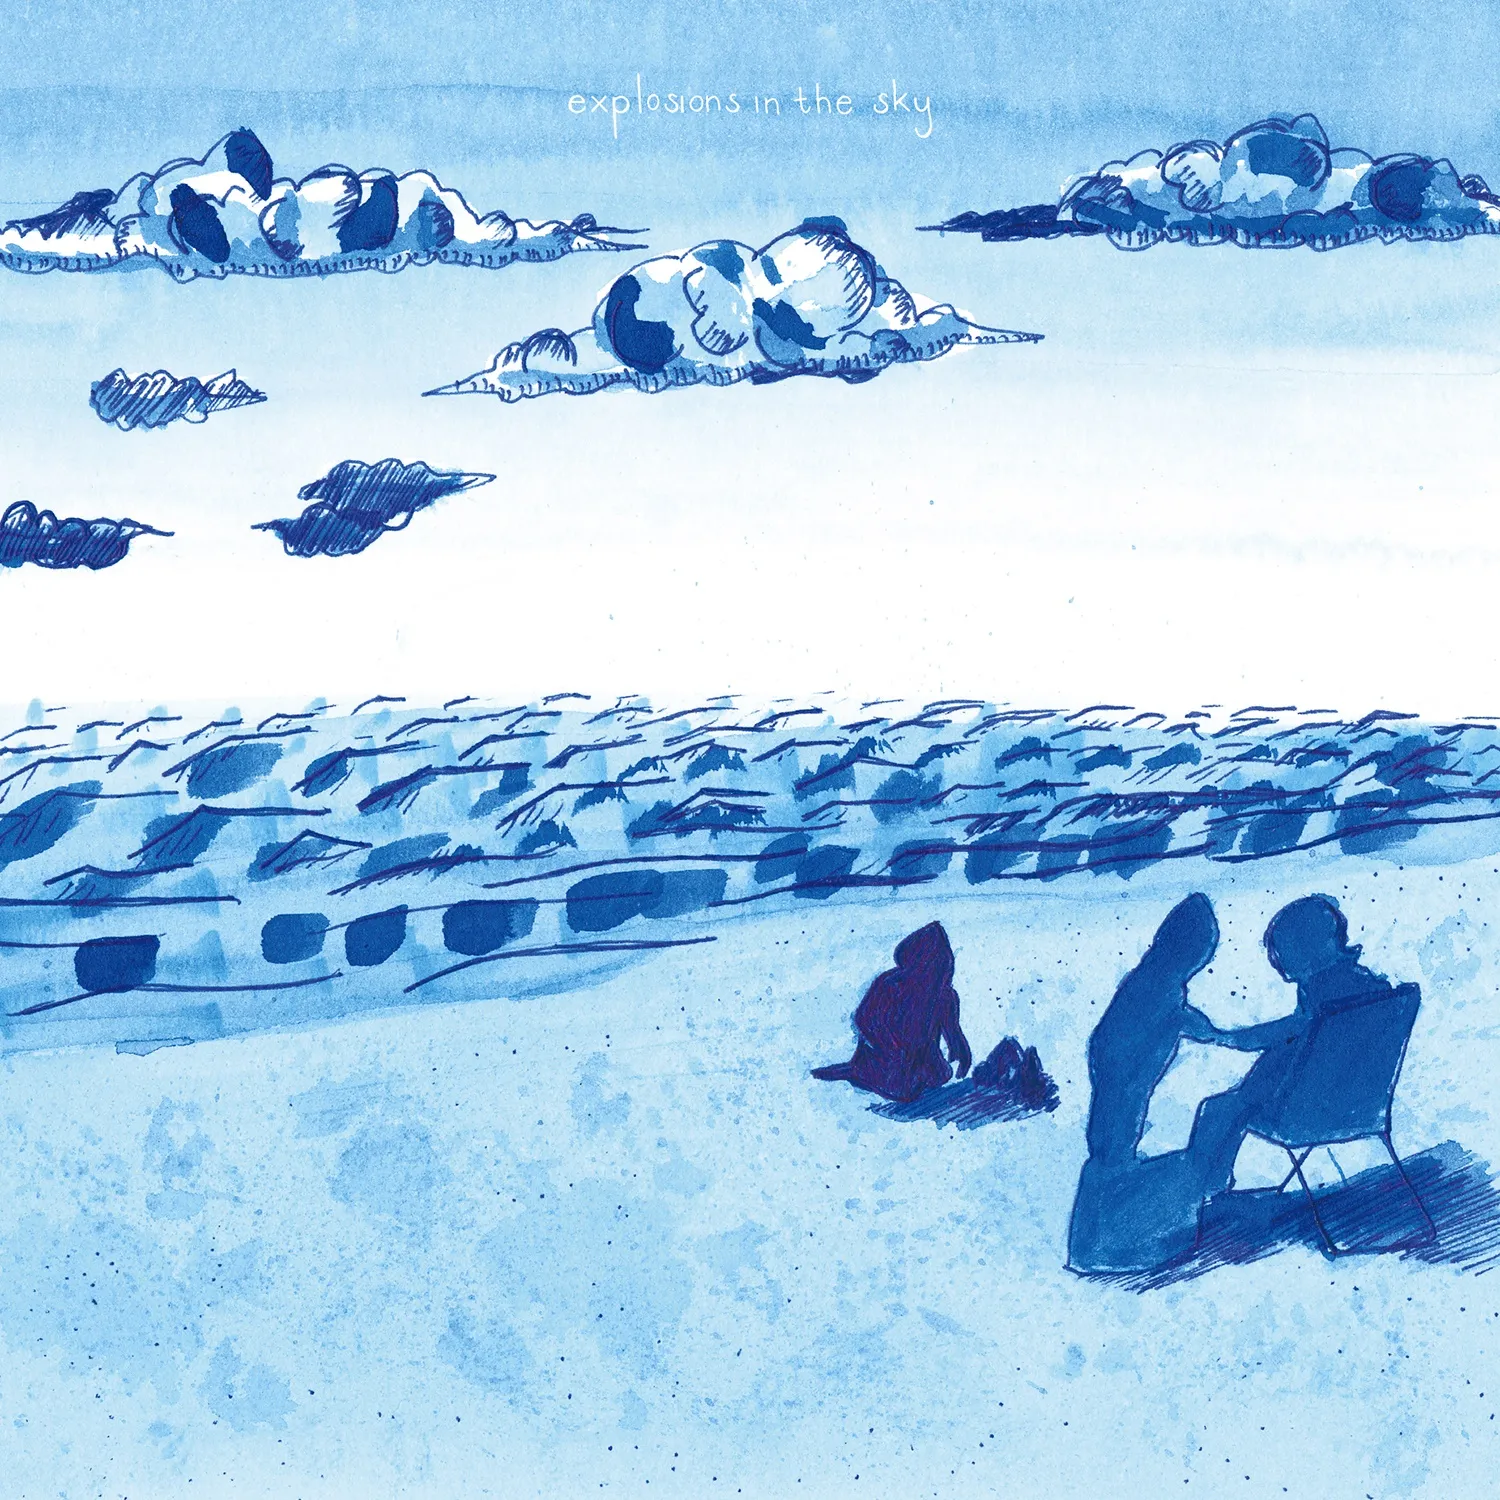 Explosions In The Sky - How Strange, Innocence (Anniversary Edition) artwork